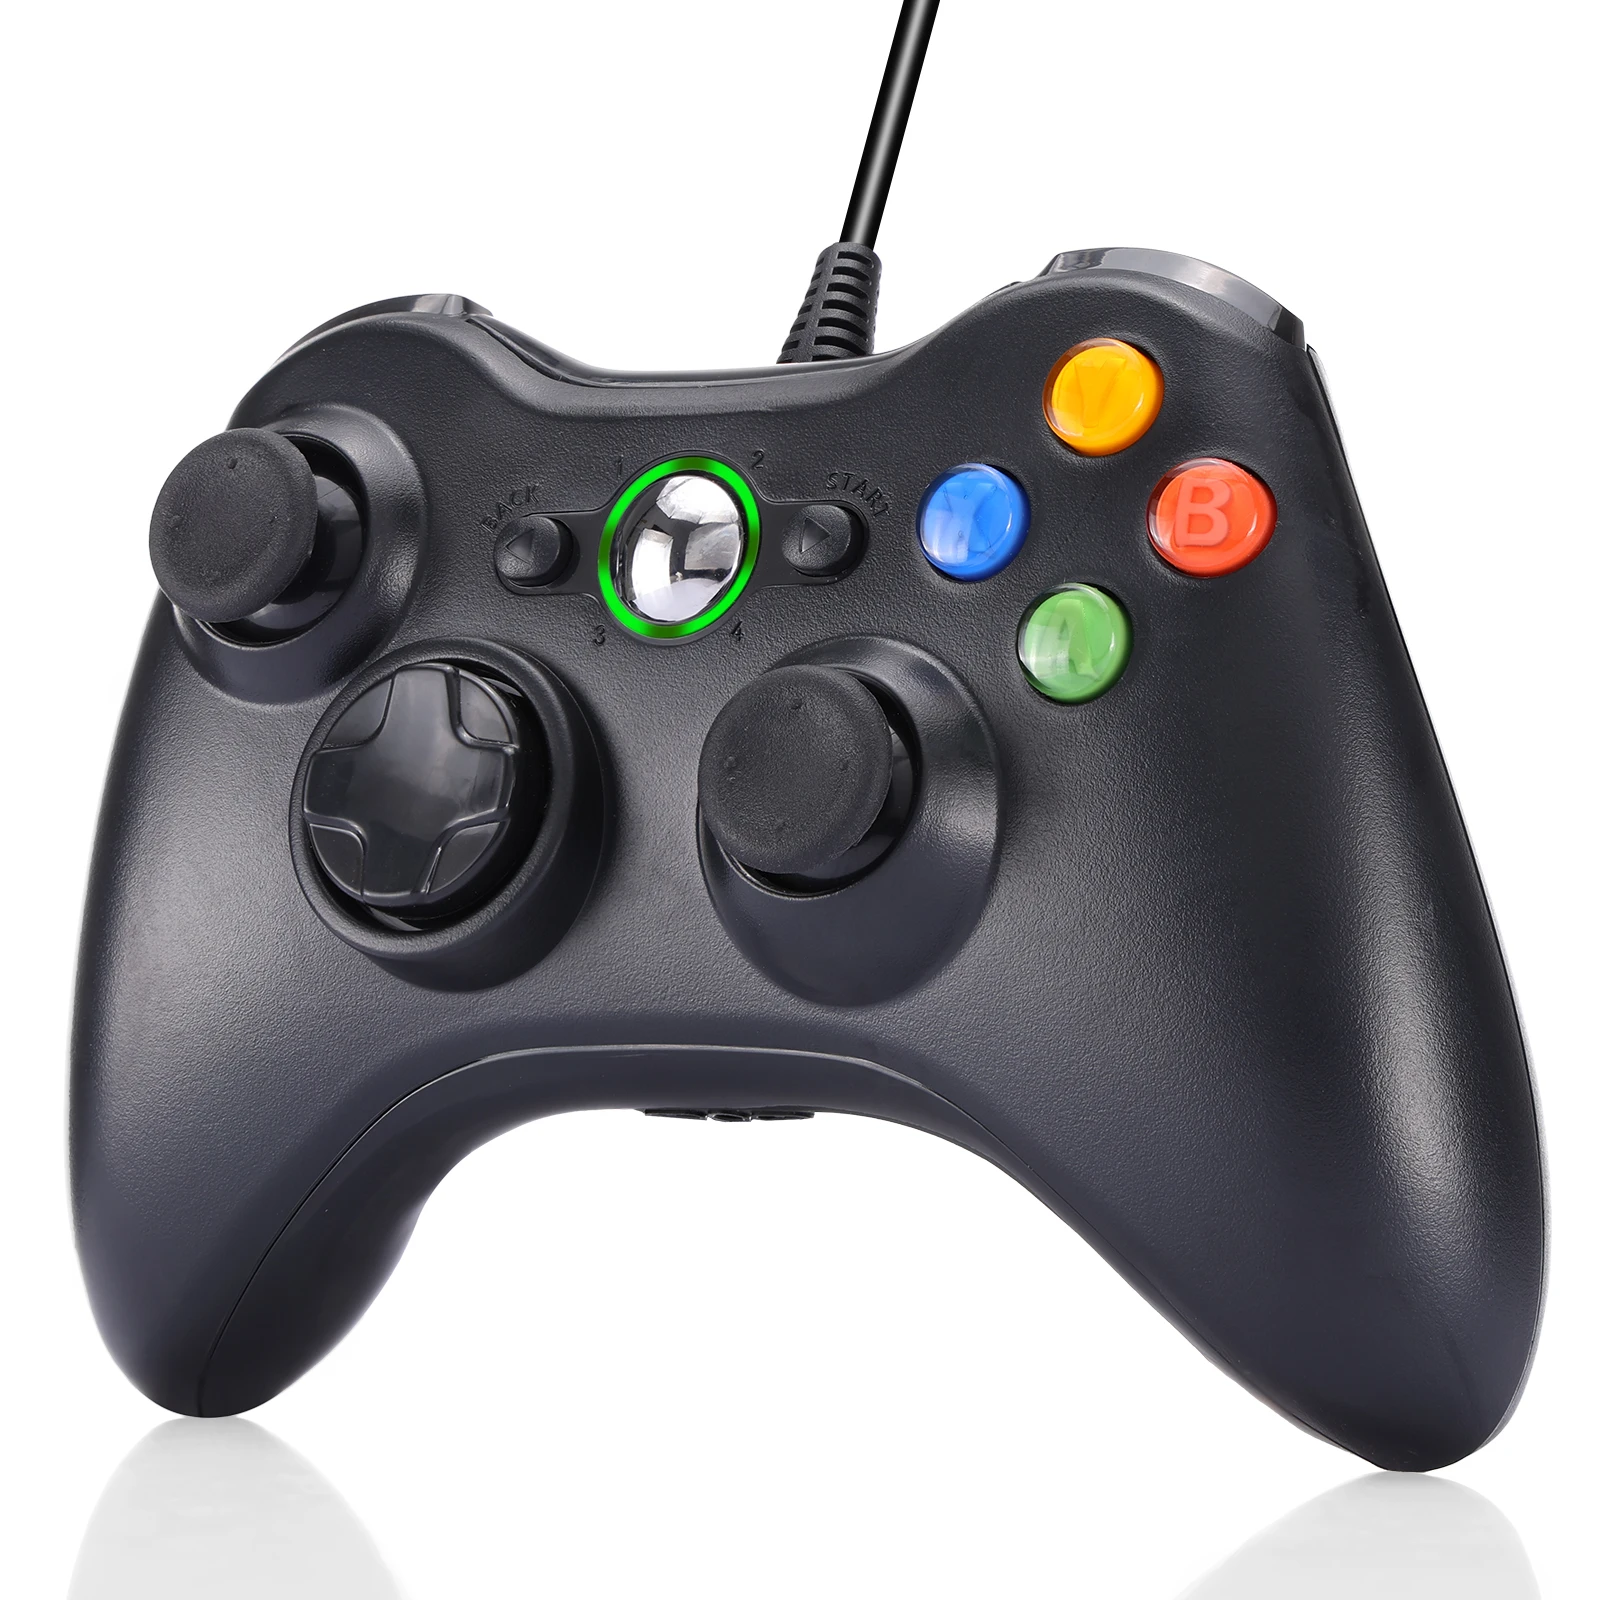 

Gamepad For Microsoft Xboxs 360 Controller Wired Joystick Joy Pad USB Game Pad Control Xboxes 360 Controller And PC